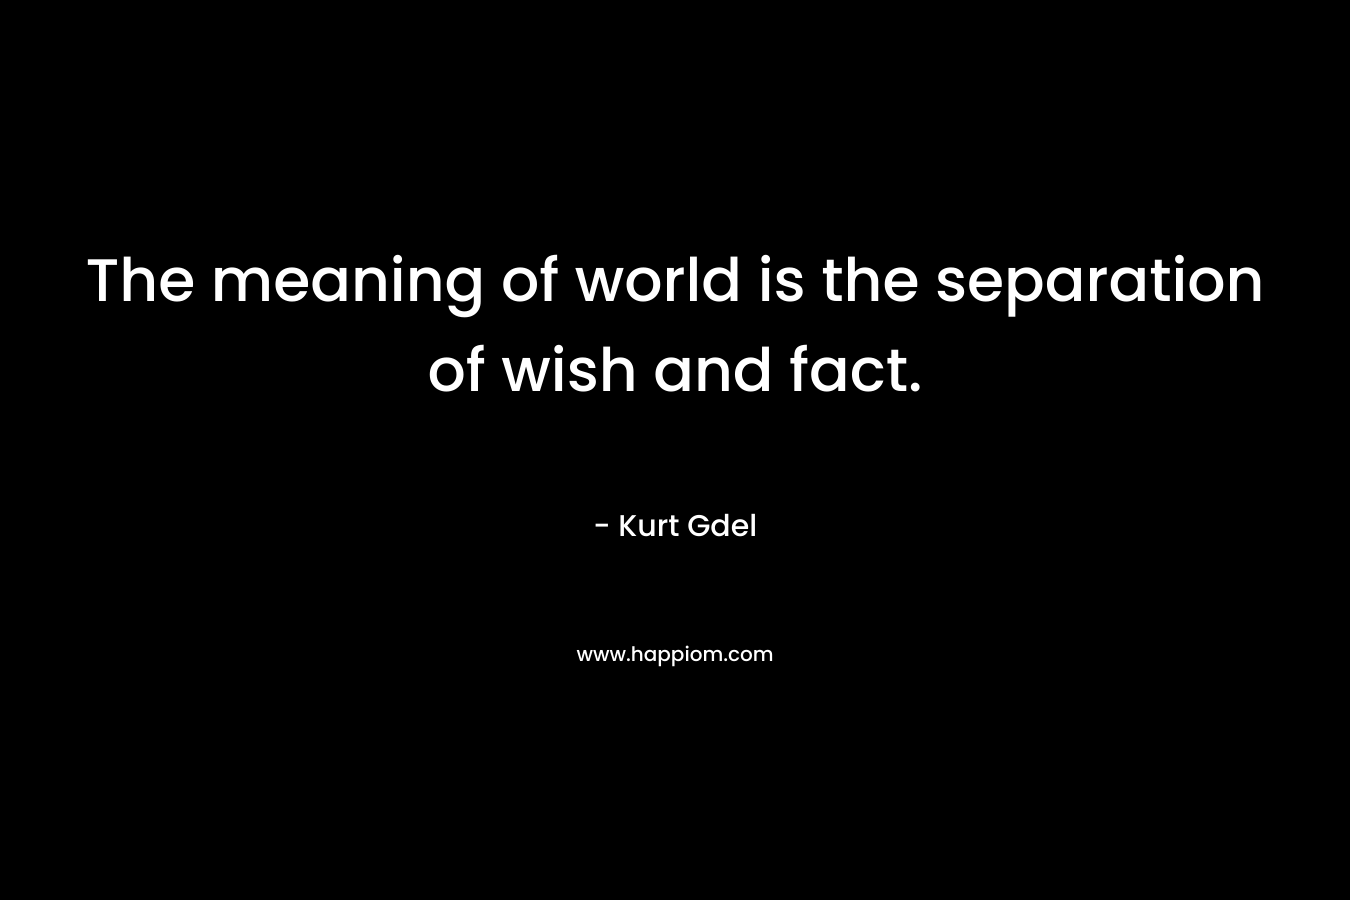 The meaning of world is the separation of wish and fact.